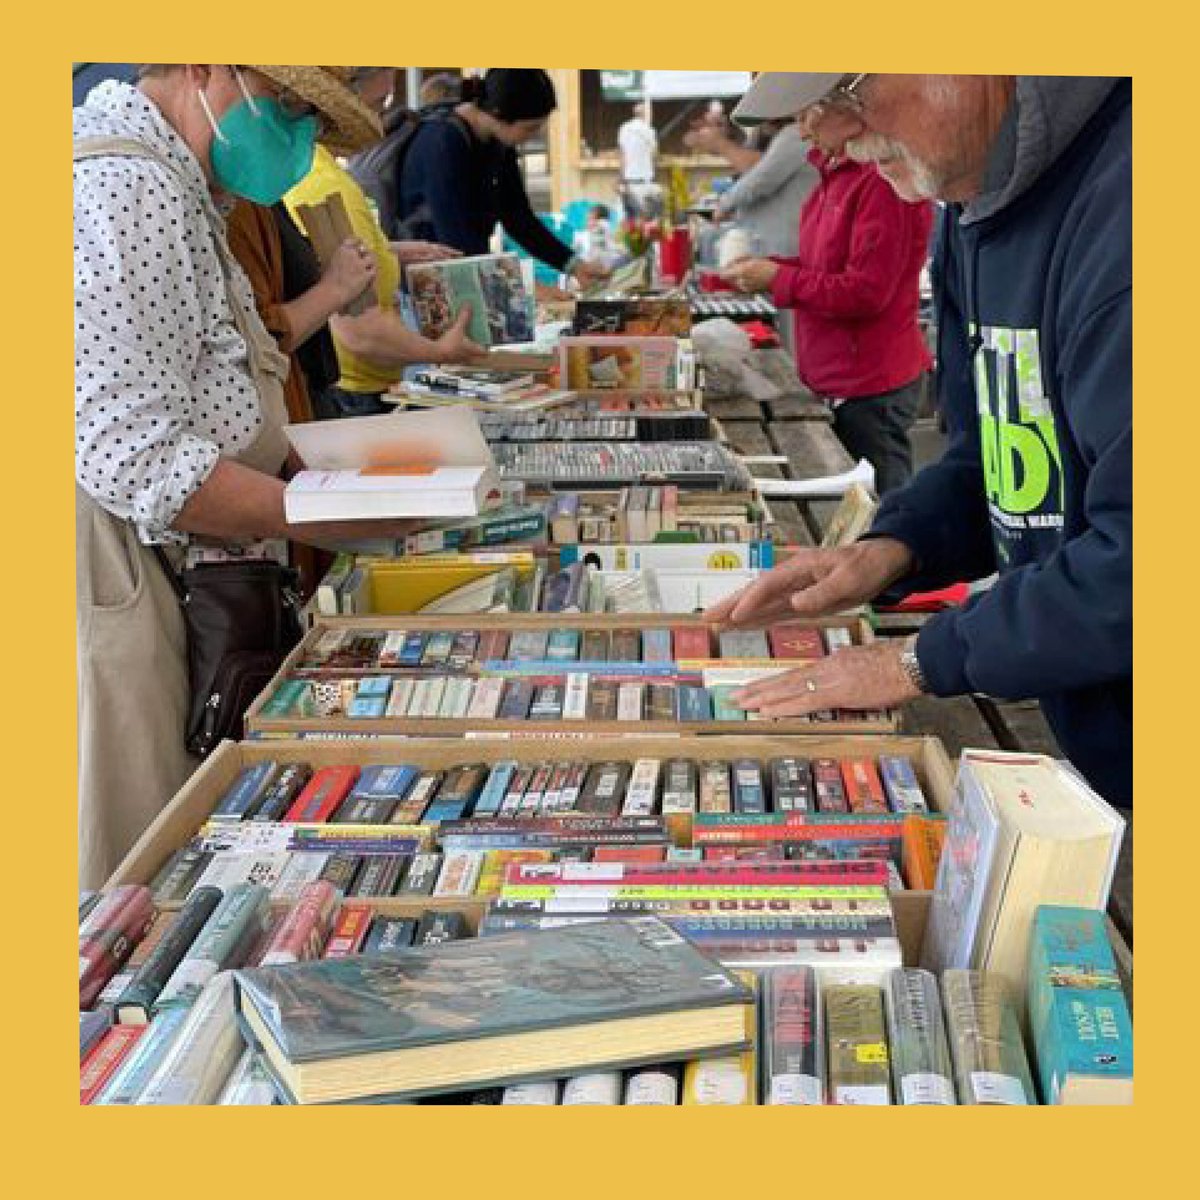 TOMORROW!  April 13 @LPL_Friends will be holding their first Pop Up Book Sale of 2024 outside @CoventMarket from 8am-1pm, rain or shine!

👀 Look for more Pop Up Book Sales coming soon! Cash or credit